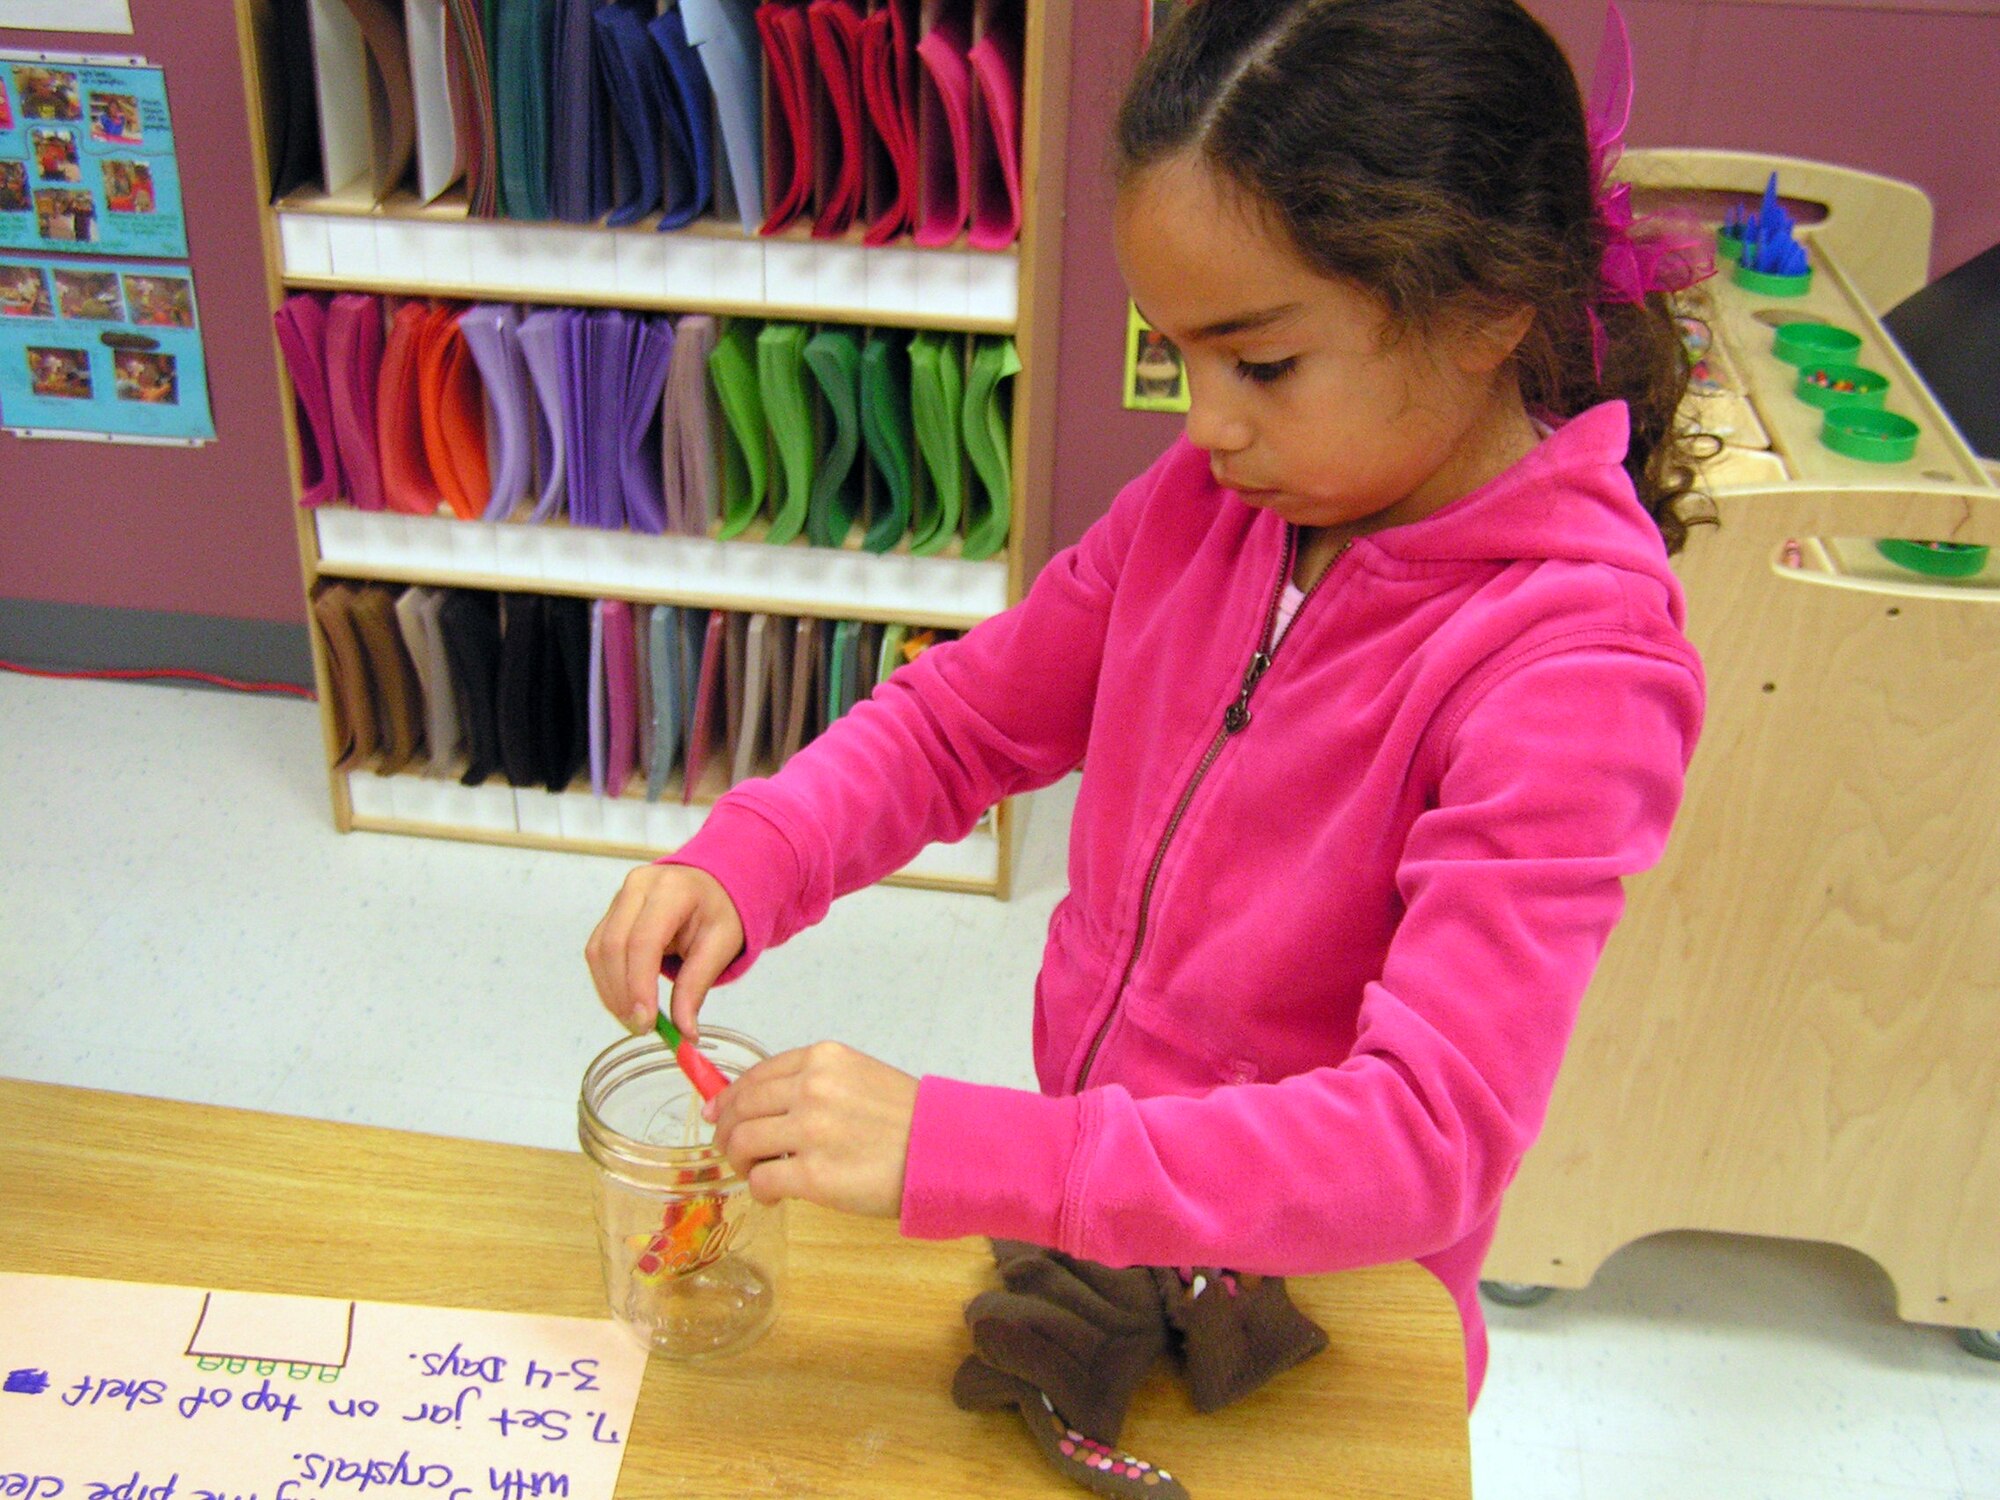 Emma Atherton, Daughter of Diana and Tech. Sgt. Neil Atherton, 509th Maintenance Squadron, makes a crystal ornament in the art area at the School-Age Program. School-Age program assistants plan and provide a wide variety of interesting and fun activities based on children's input. Parents may enroll their child for before school care, after school care, or before and after school care. School-Age program provides full day care on out-of-school days and a full-day summer camp. Fees are based on total family income.